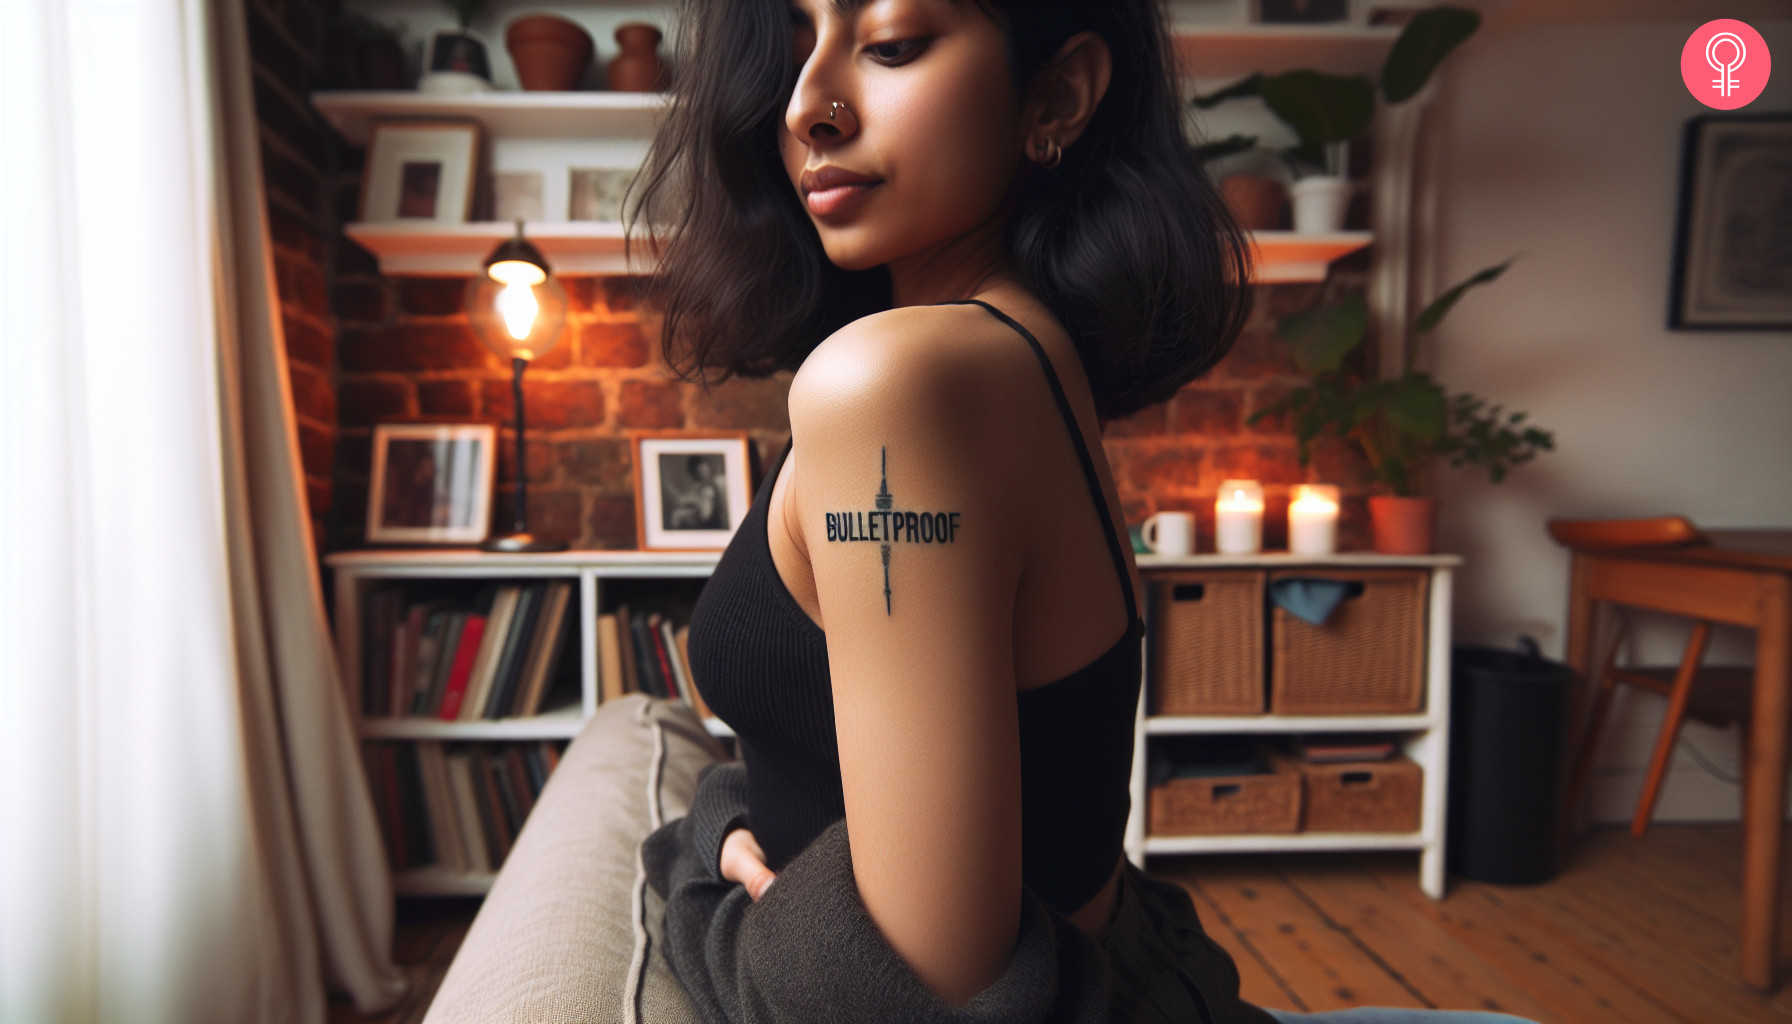 Woman with a bulletproof tattoo on the upper arm